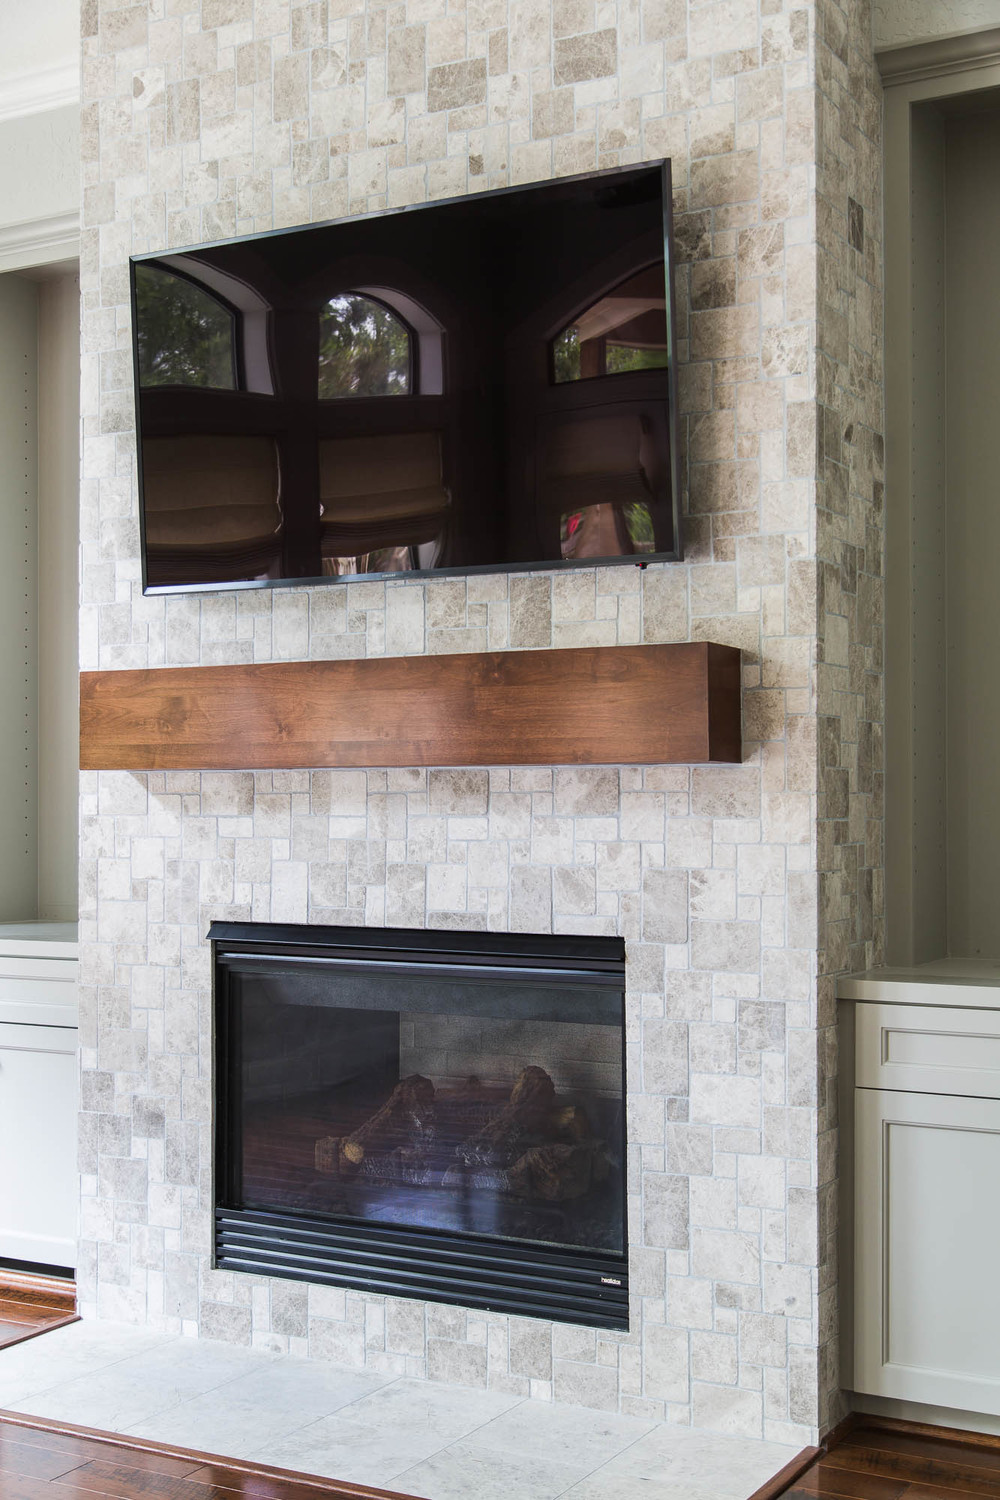 Tile Or Stone Cladding, Floor To Ceiling Tile Around Fireplace